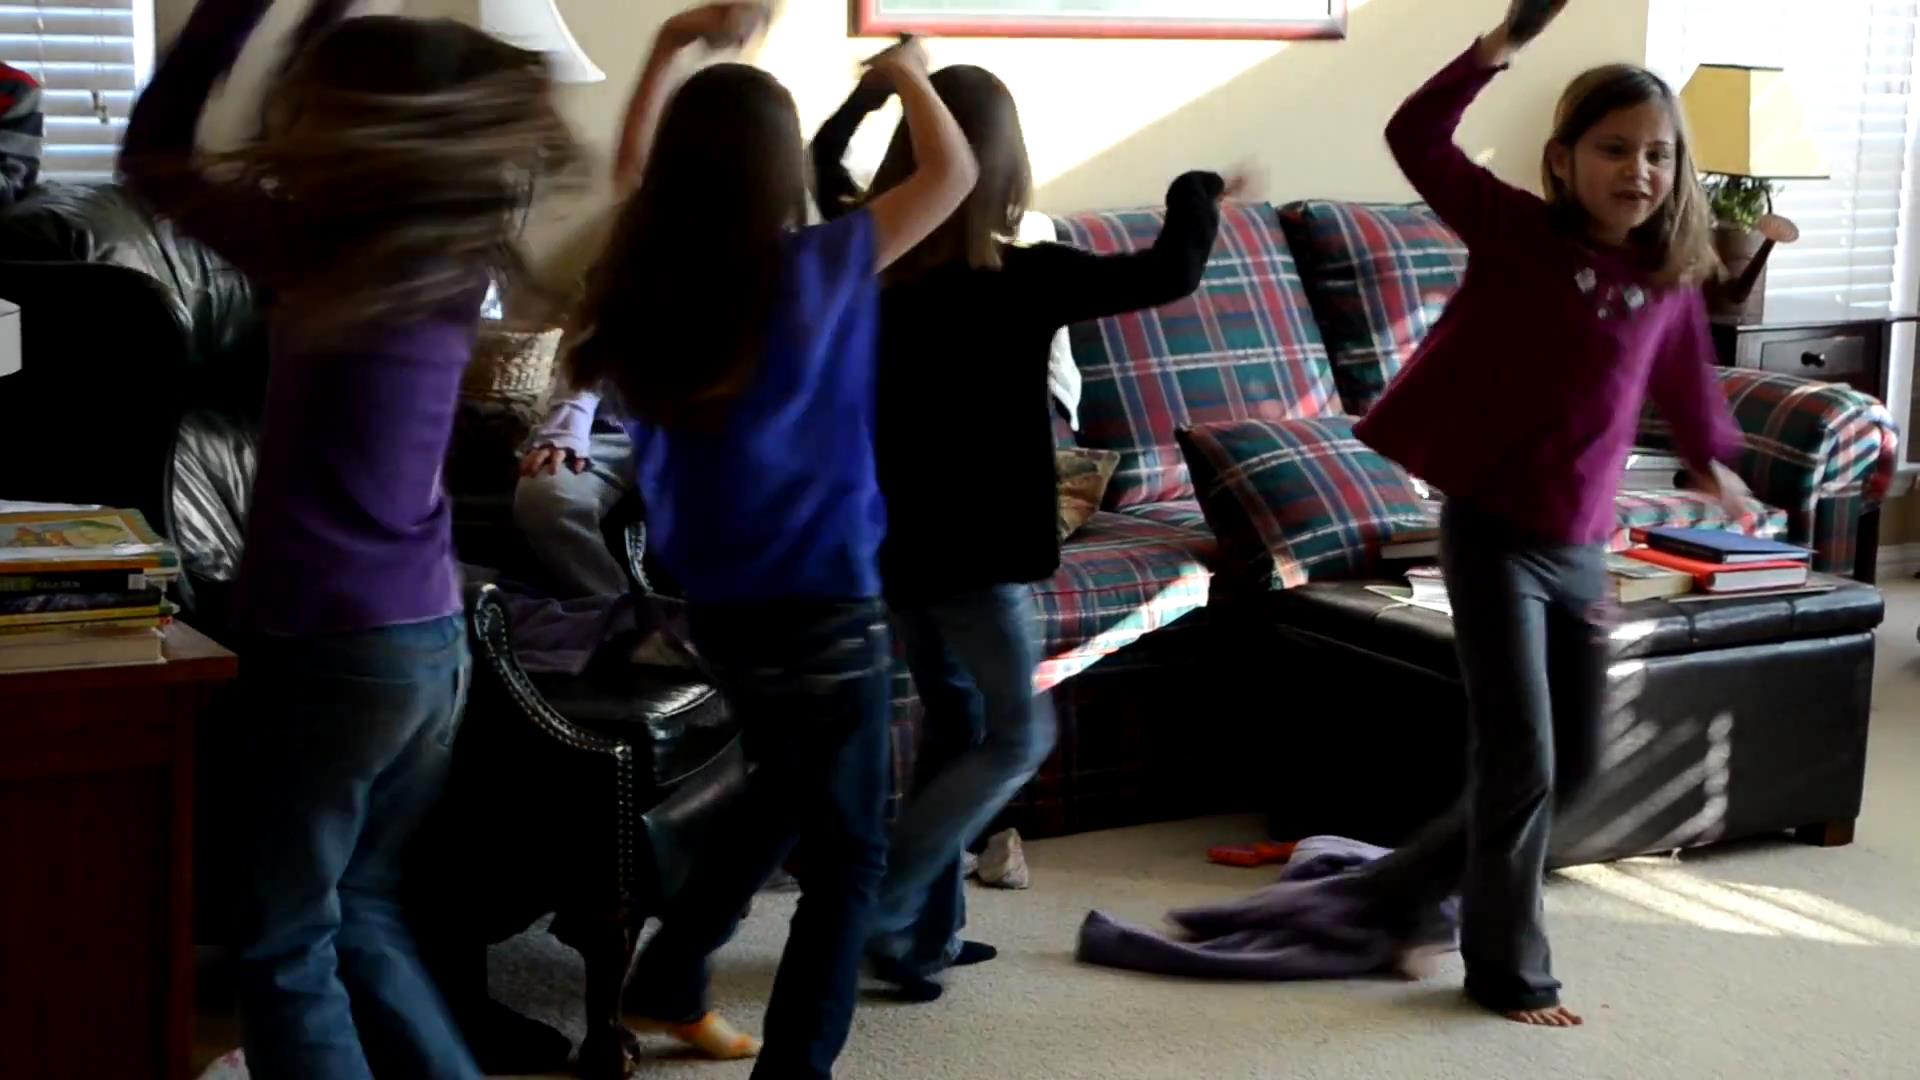 Just Dance 4 - 4 friends try to